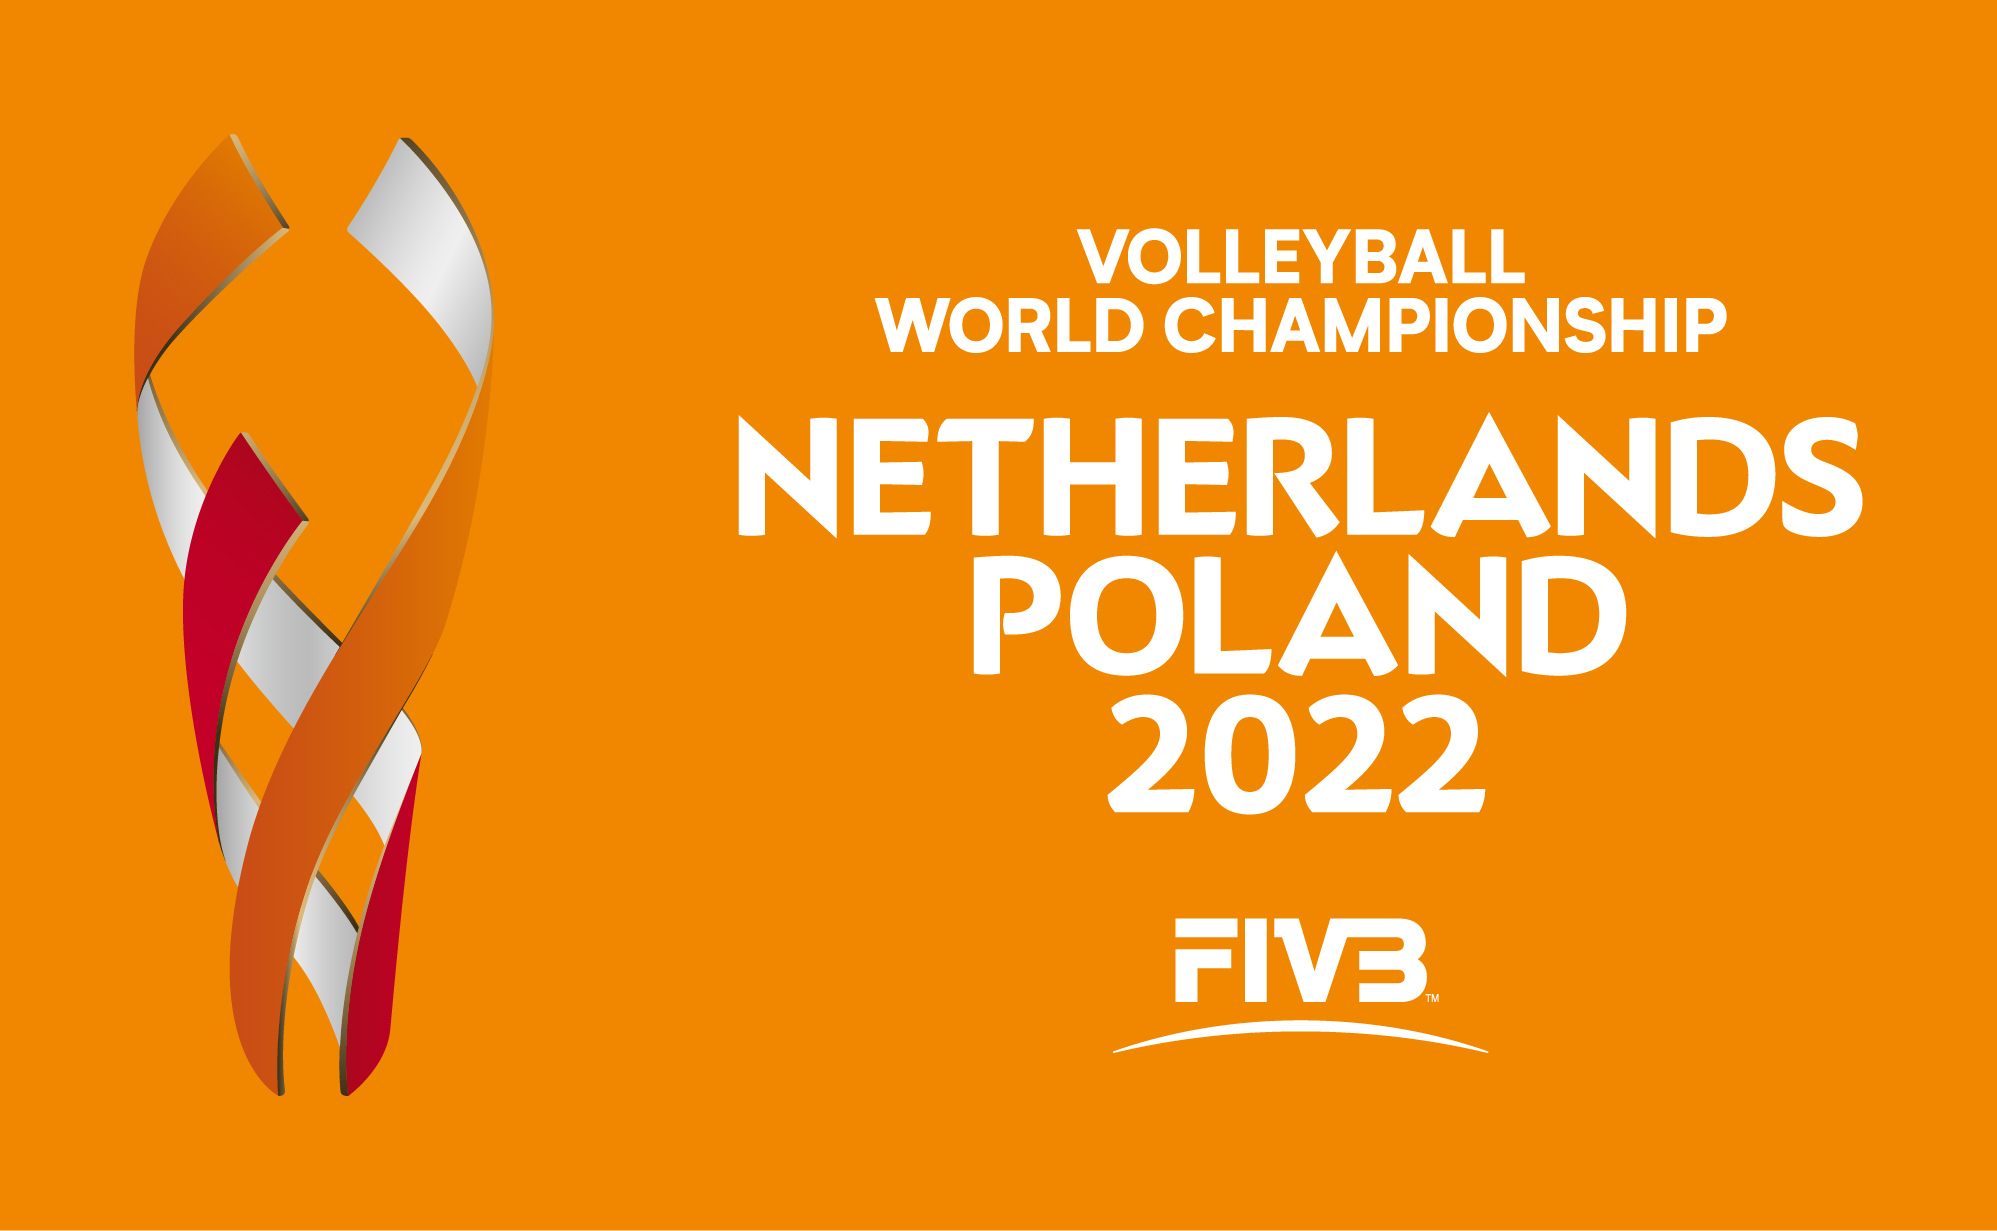 Drawing of Lots - FIVB Volleyball Women's World Championships 2022 